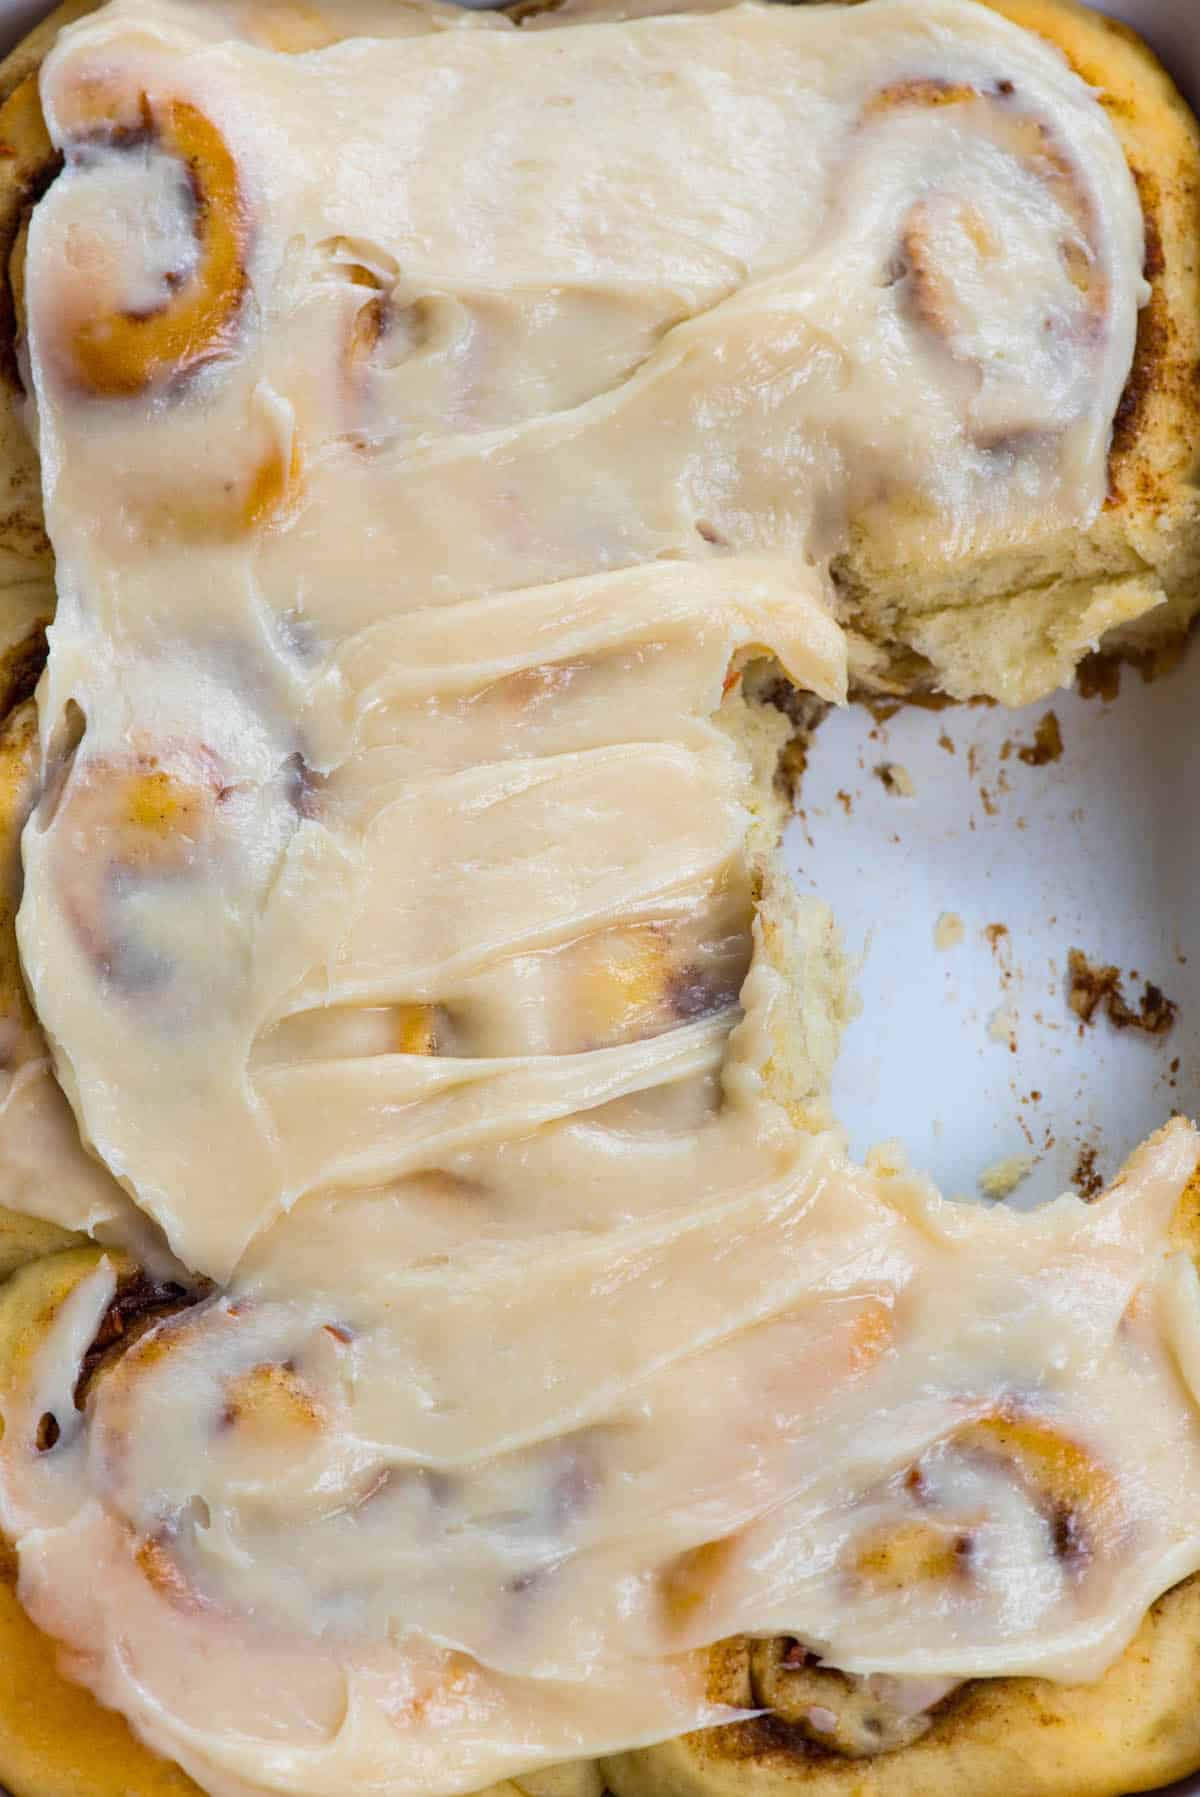 cinnamon rolls with carrots baked in on a white plate.